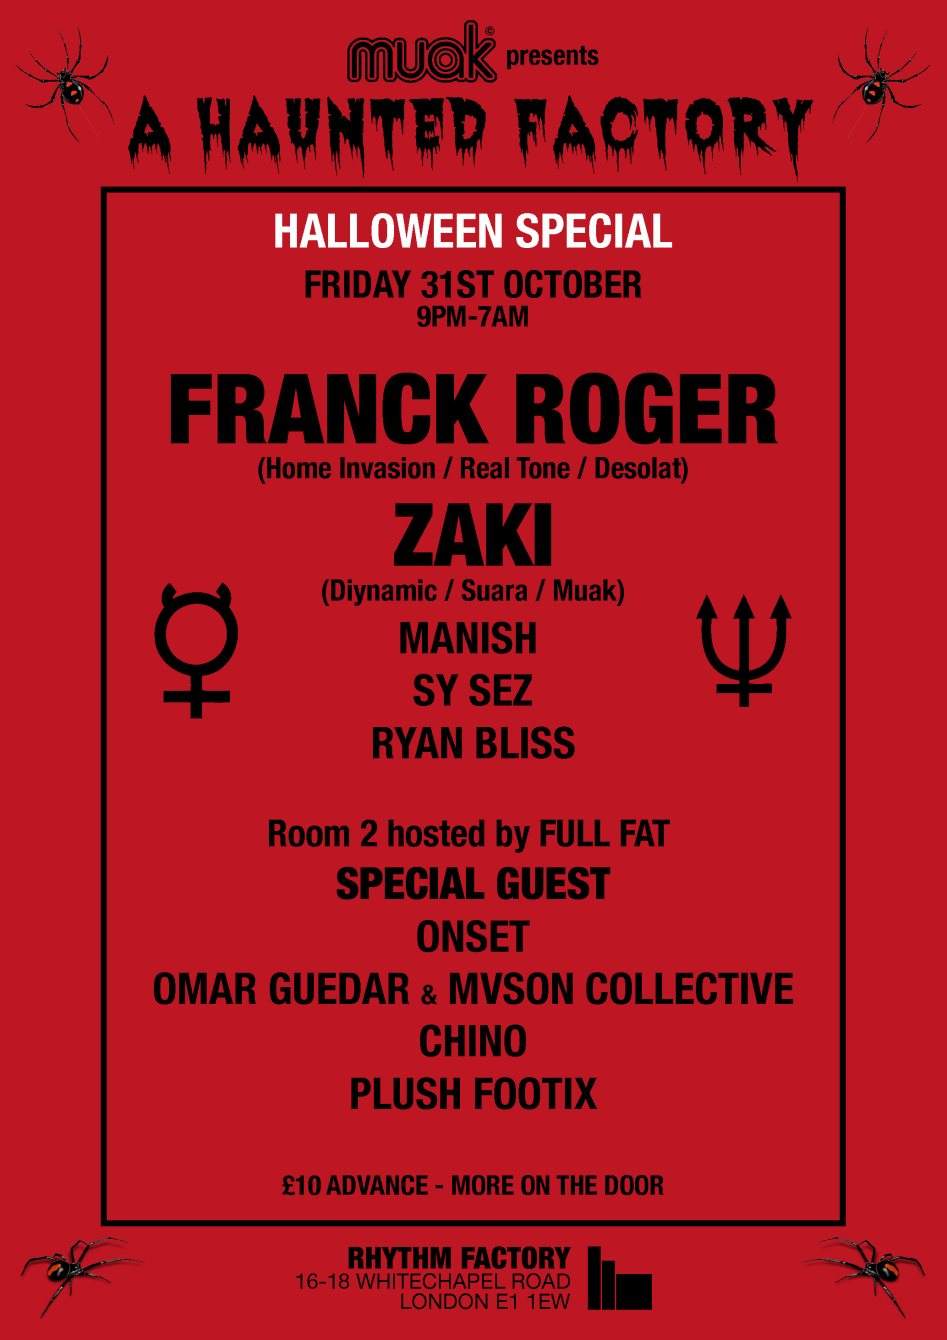 Muak presents the Haunted Factory with Franck Roger - Página trasera